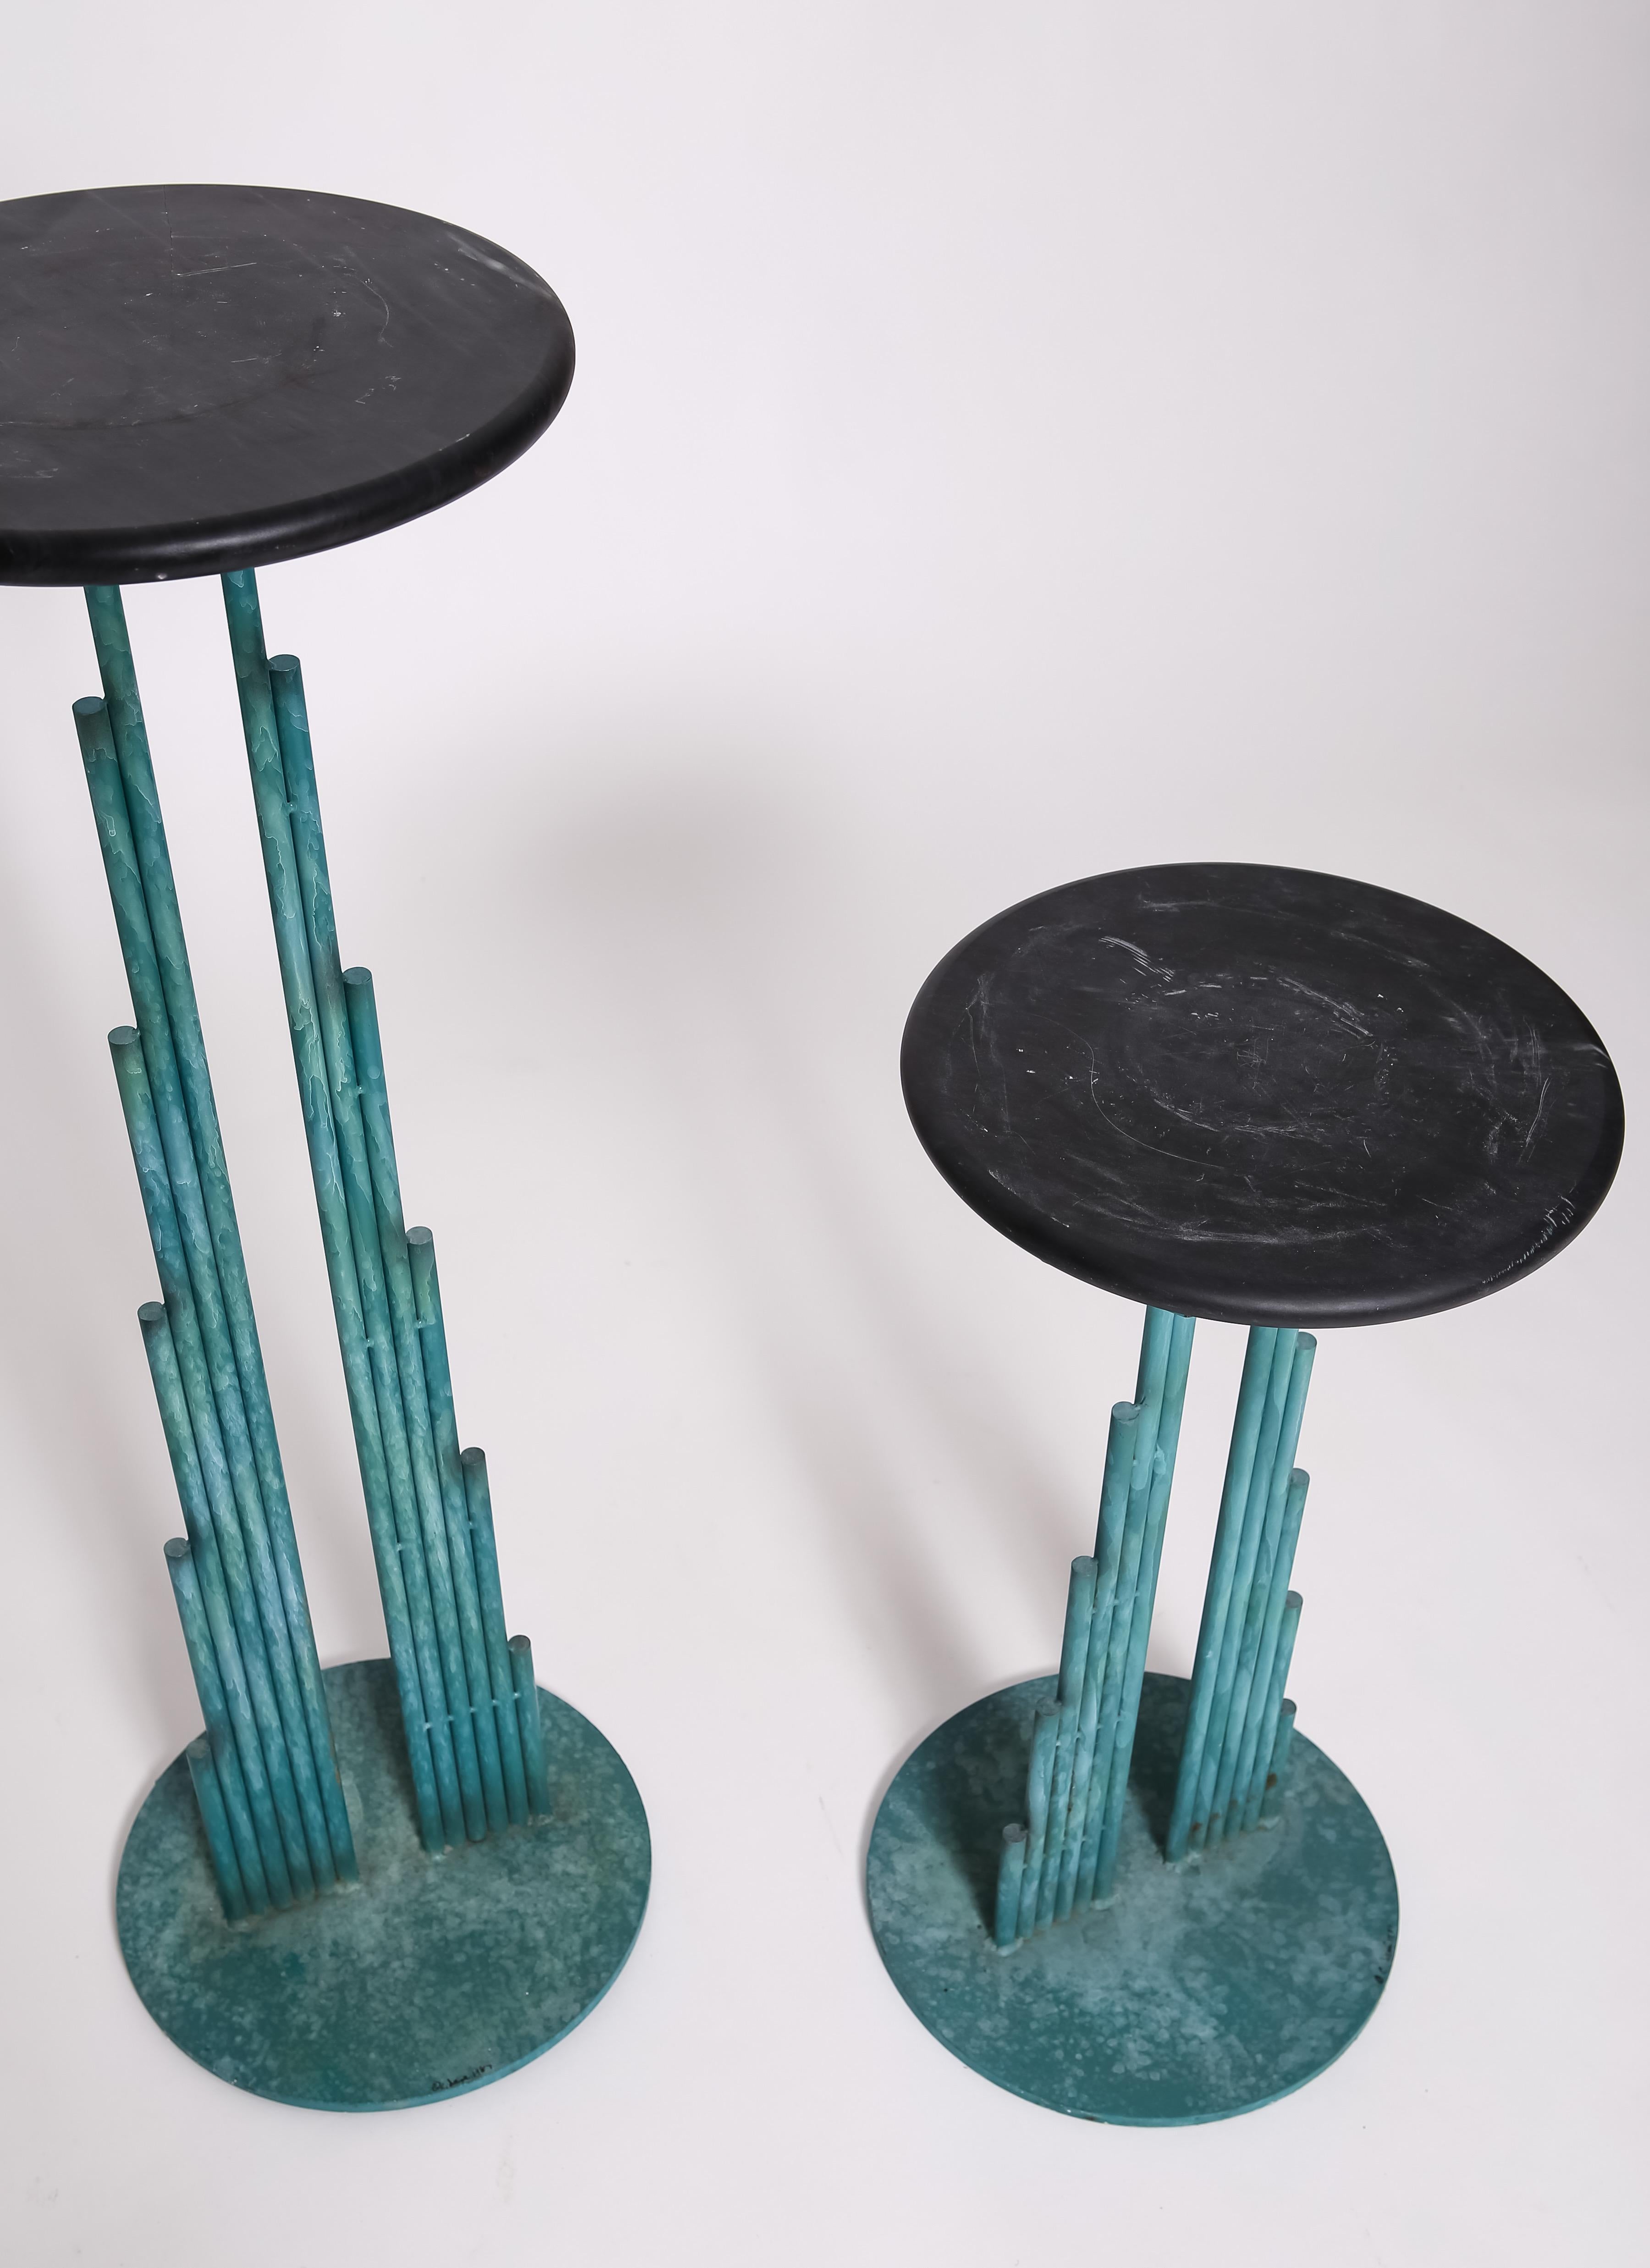 Verdigris-effect painted steel pedestals with removable slate tops, signed at base C.Jeré 1987. Pair. 24” & 36” heights with 11” diameter tops. Really cool uncommon design; great for plants. Finish is all original in great condition. Rare. 